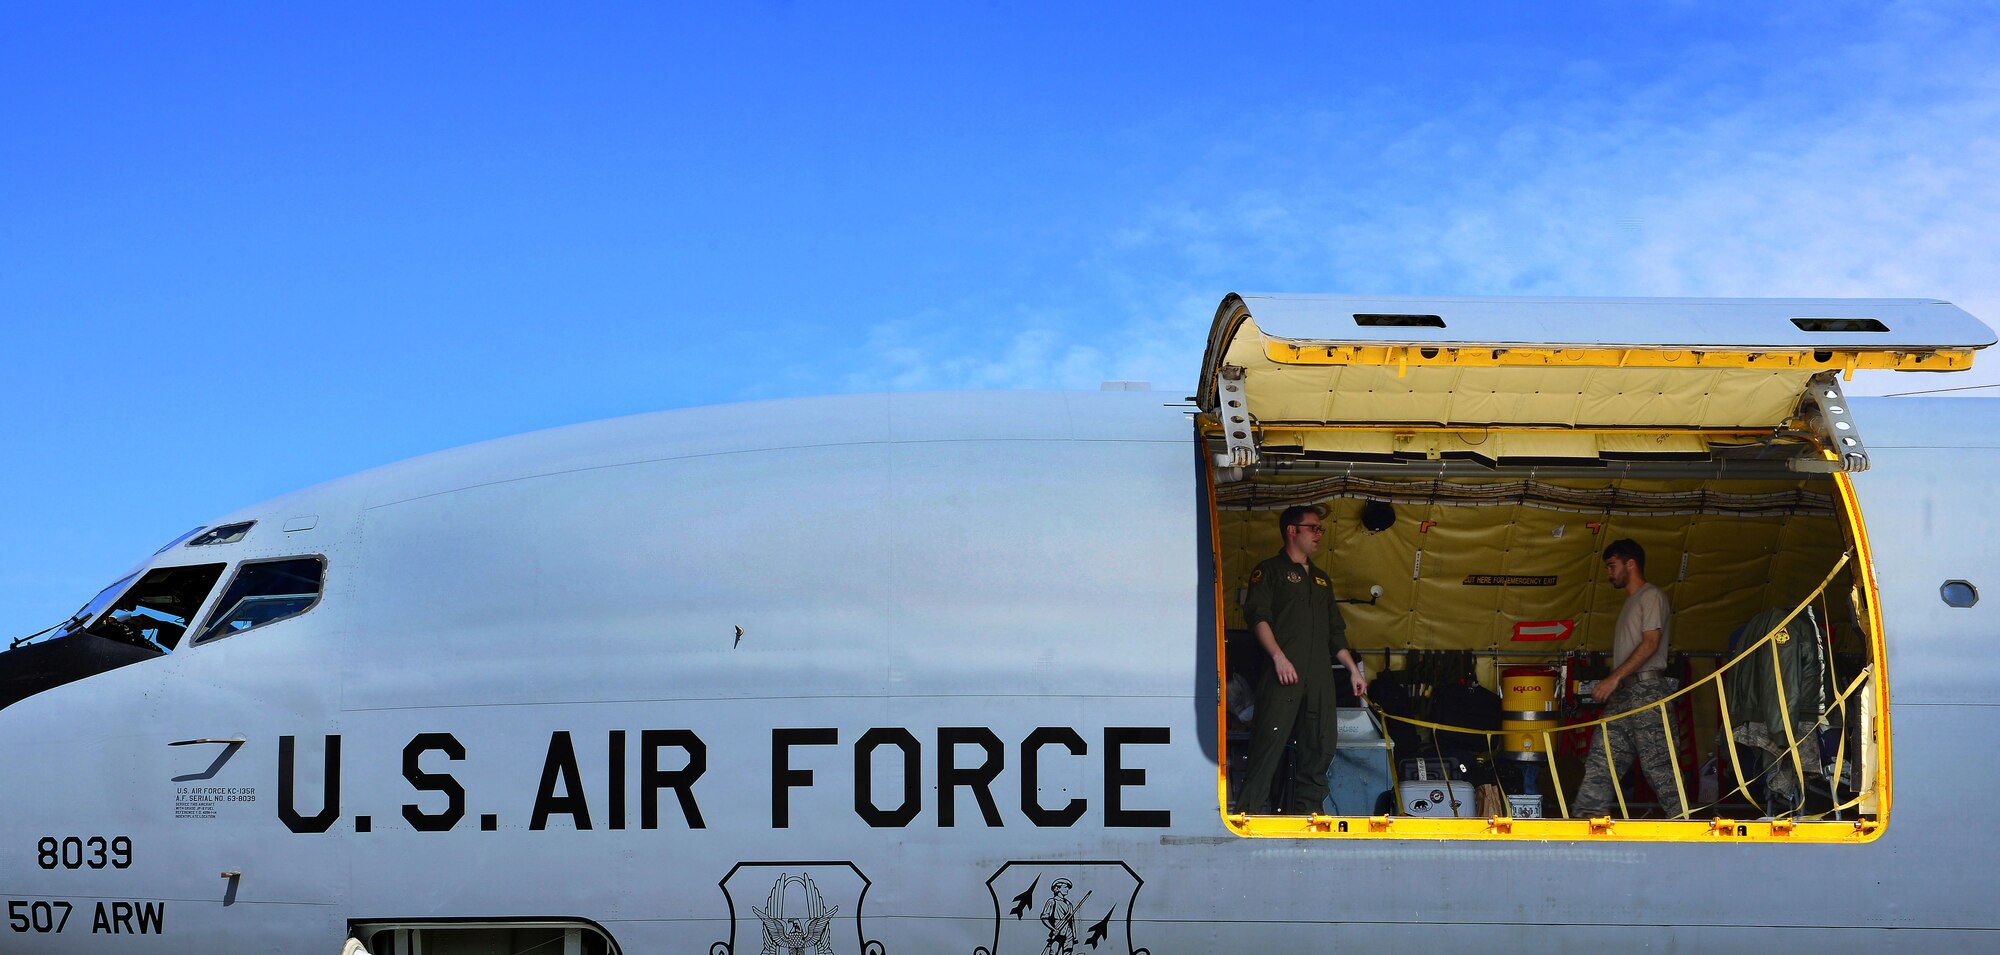 U.S. Air Force Airmen with the 507th Air Refueling Wing from Tinker Air Force Base, Okla., close a door on a KC-135 Stratotanker, April 21, 2015, at Aviano Air Base, Italy. More than 50 Air Force Reservists including chaplains, crew chiefs and force support worked with Aviano units during their two-week required annual tour. (U.S. Air Force photo by Senior Airman Matthew Lotz/Released)